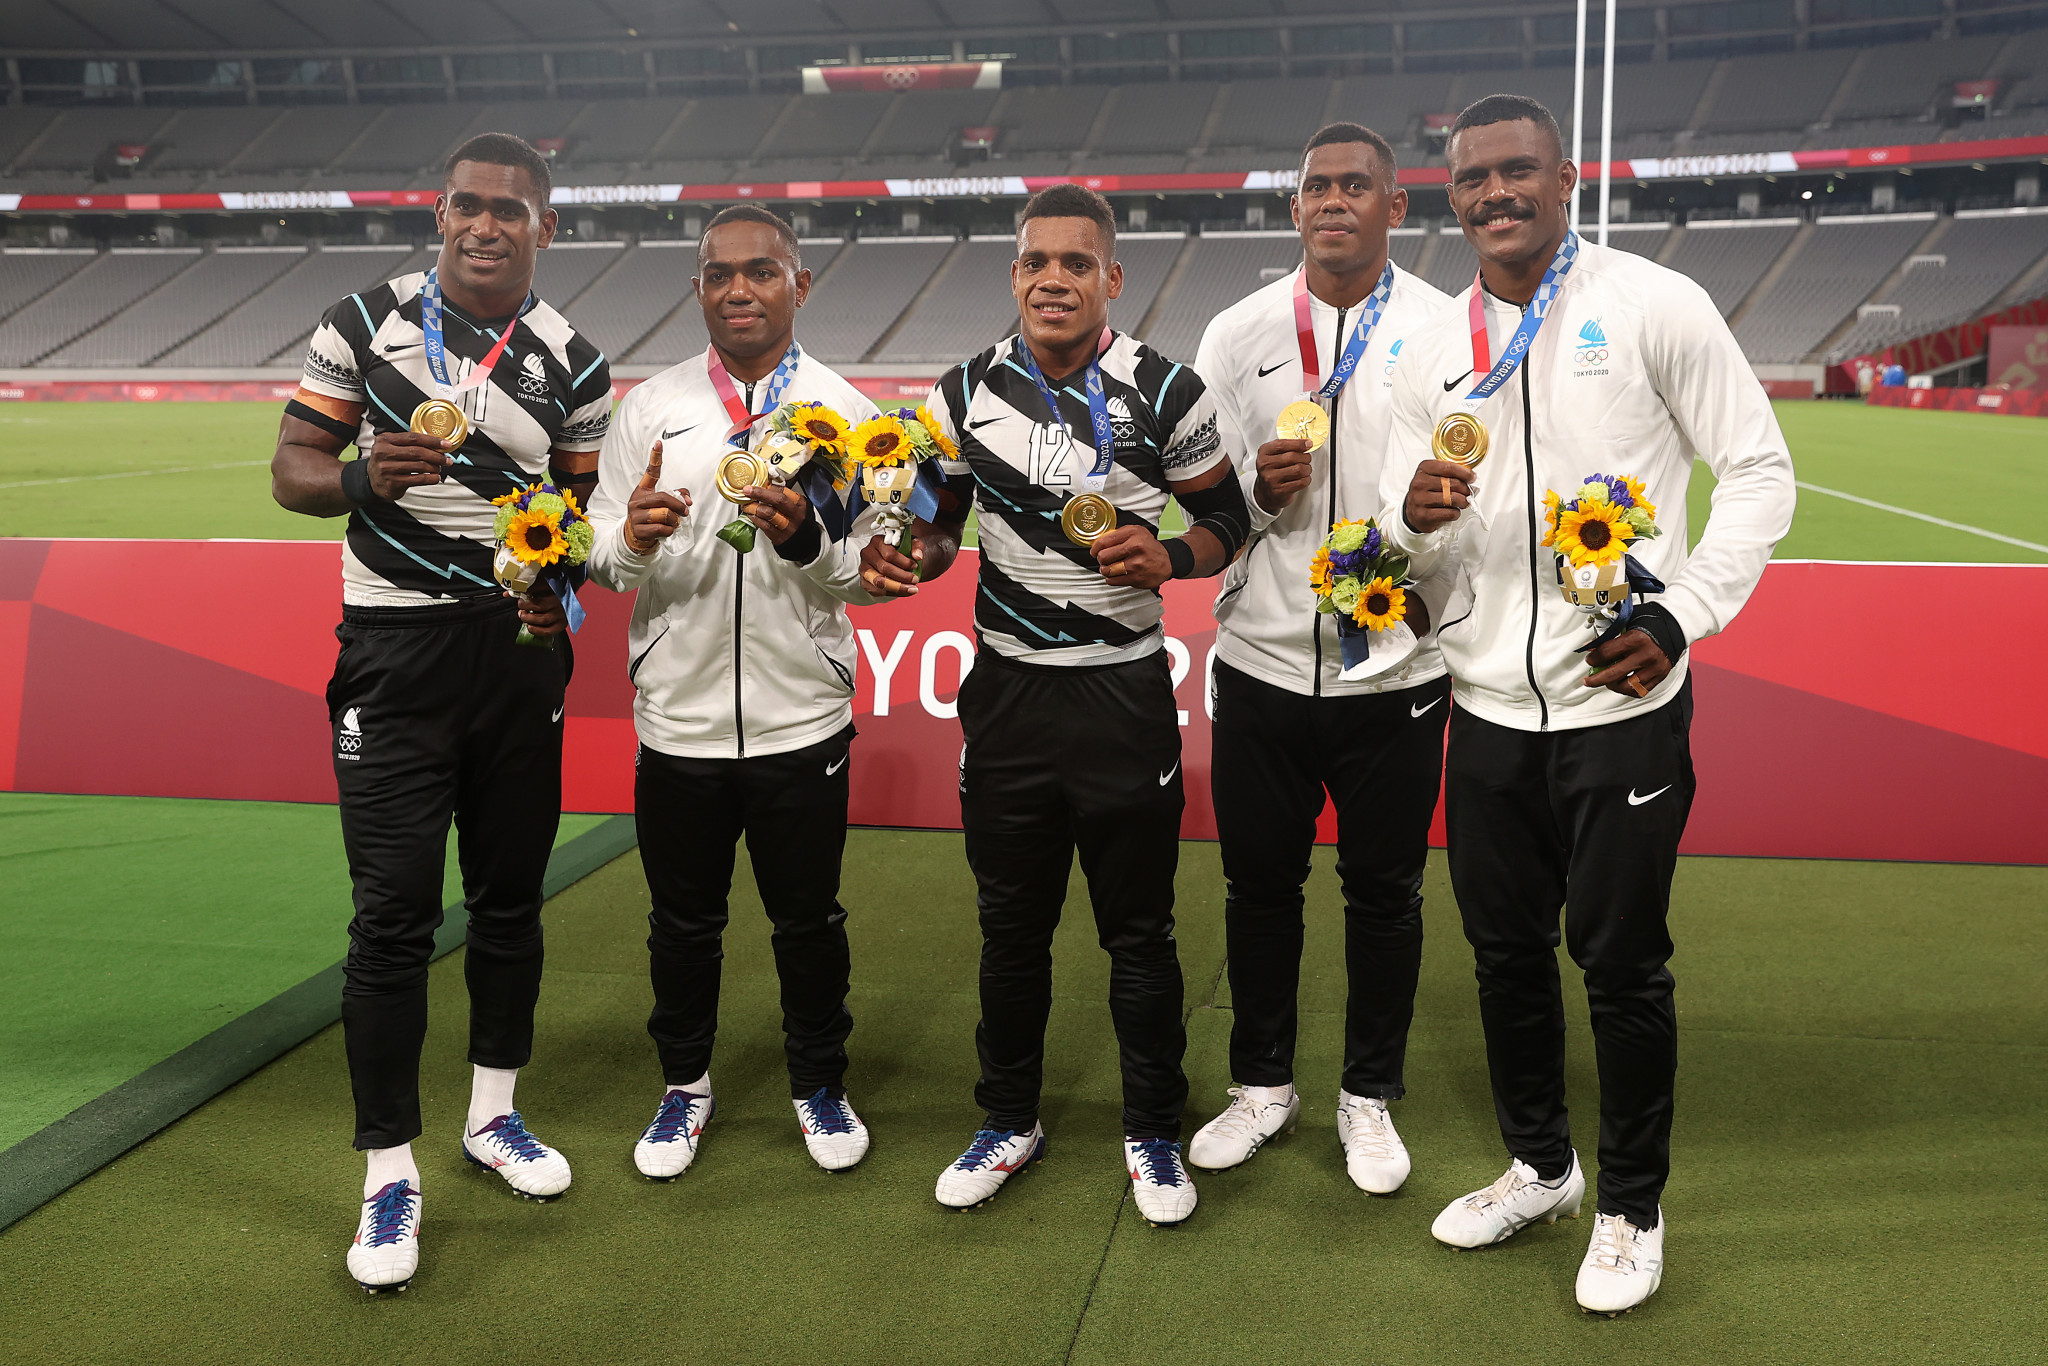 Fiji defending their men's rugby sevens title, and those two gold medals are the only Olympic medals in the country's history ©Getty Images